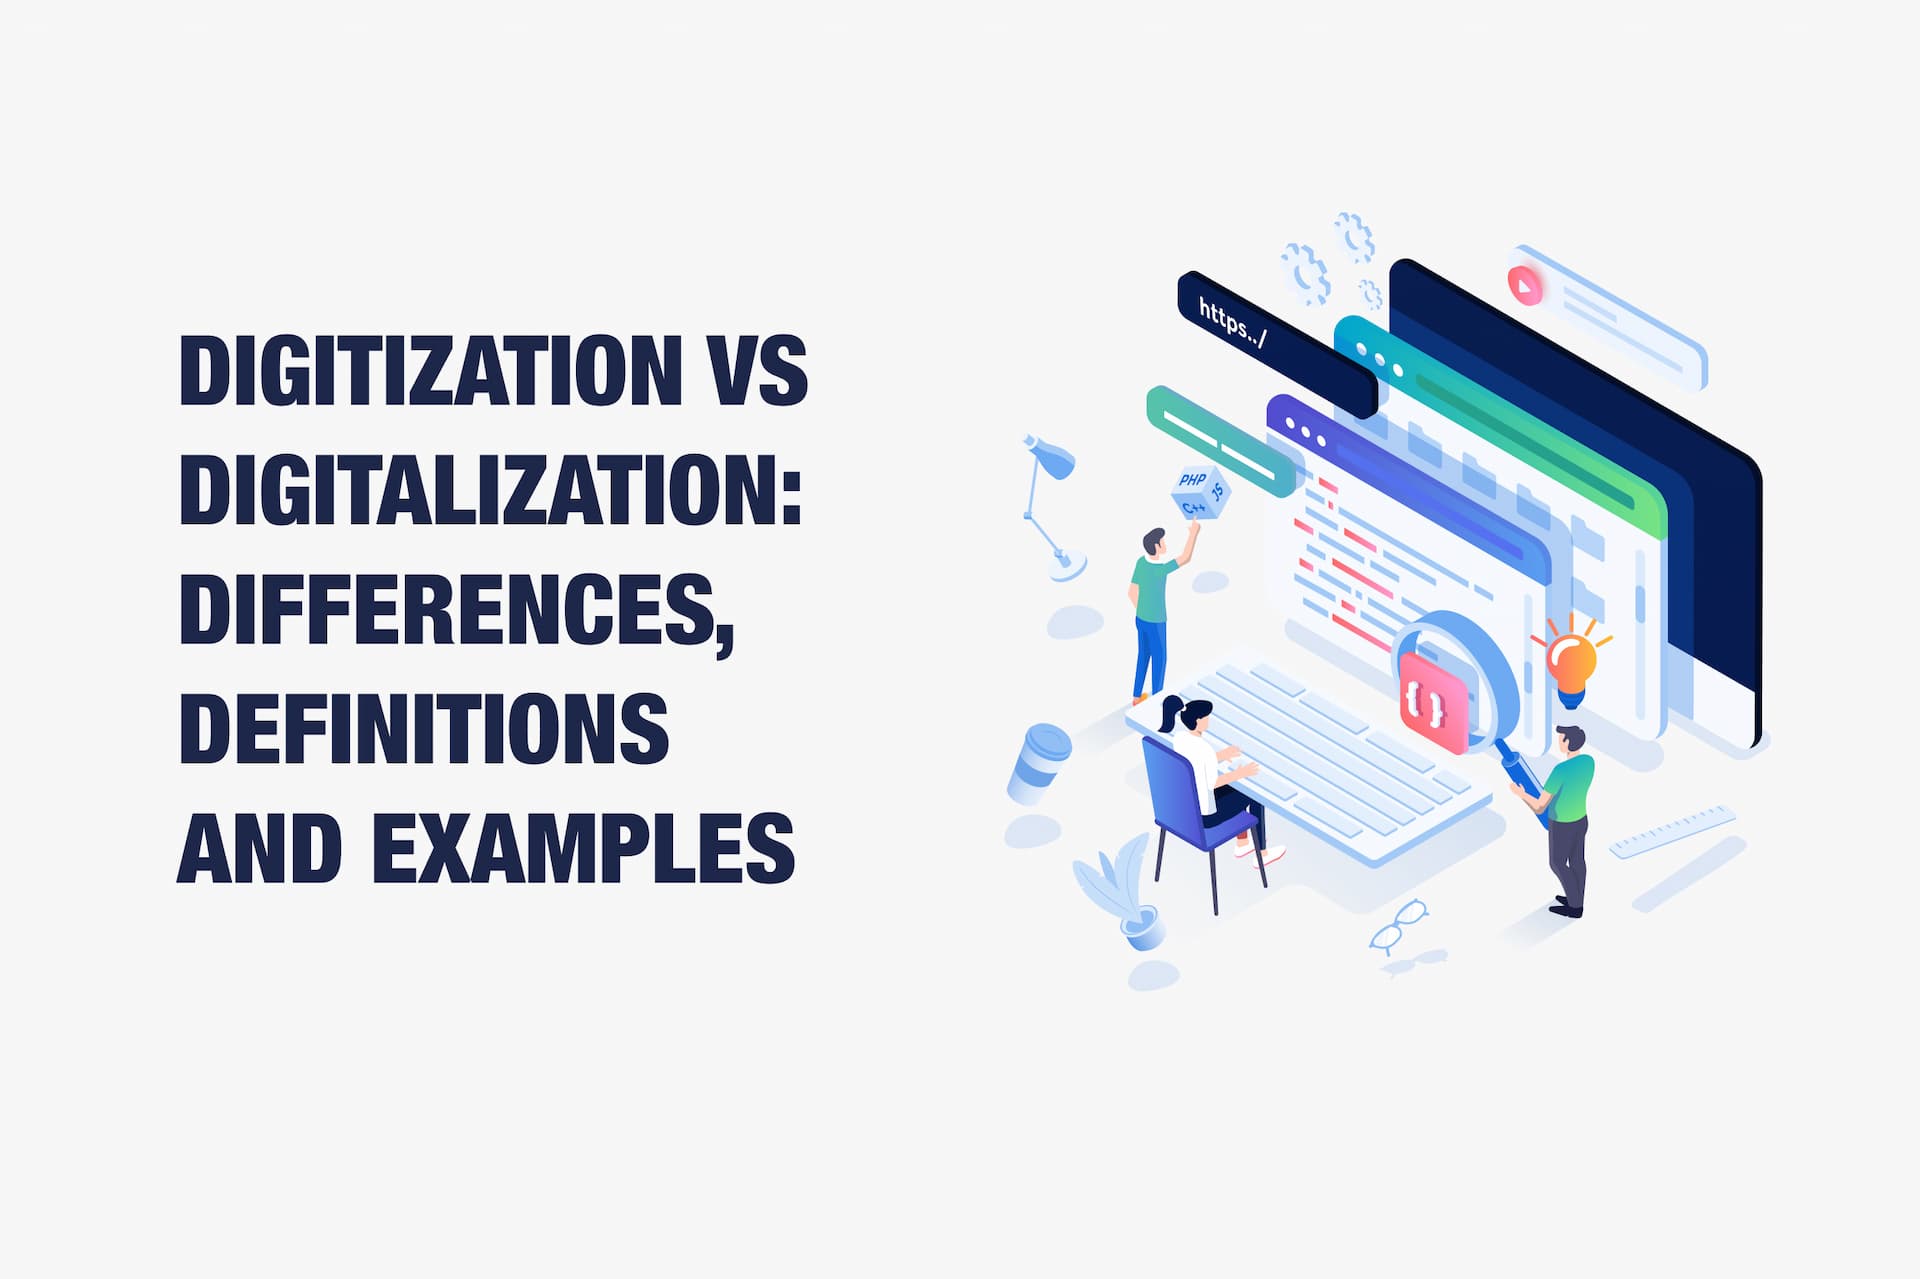 Digitization vs Digitalization: Differences, Definitions and Examples